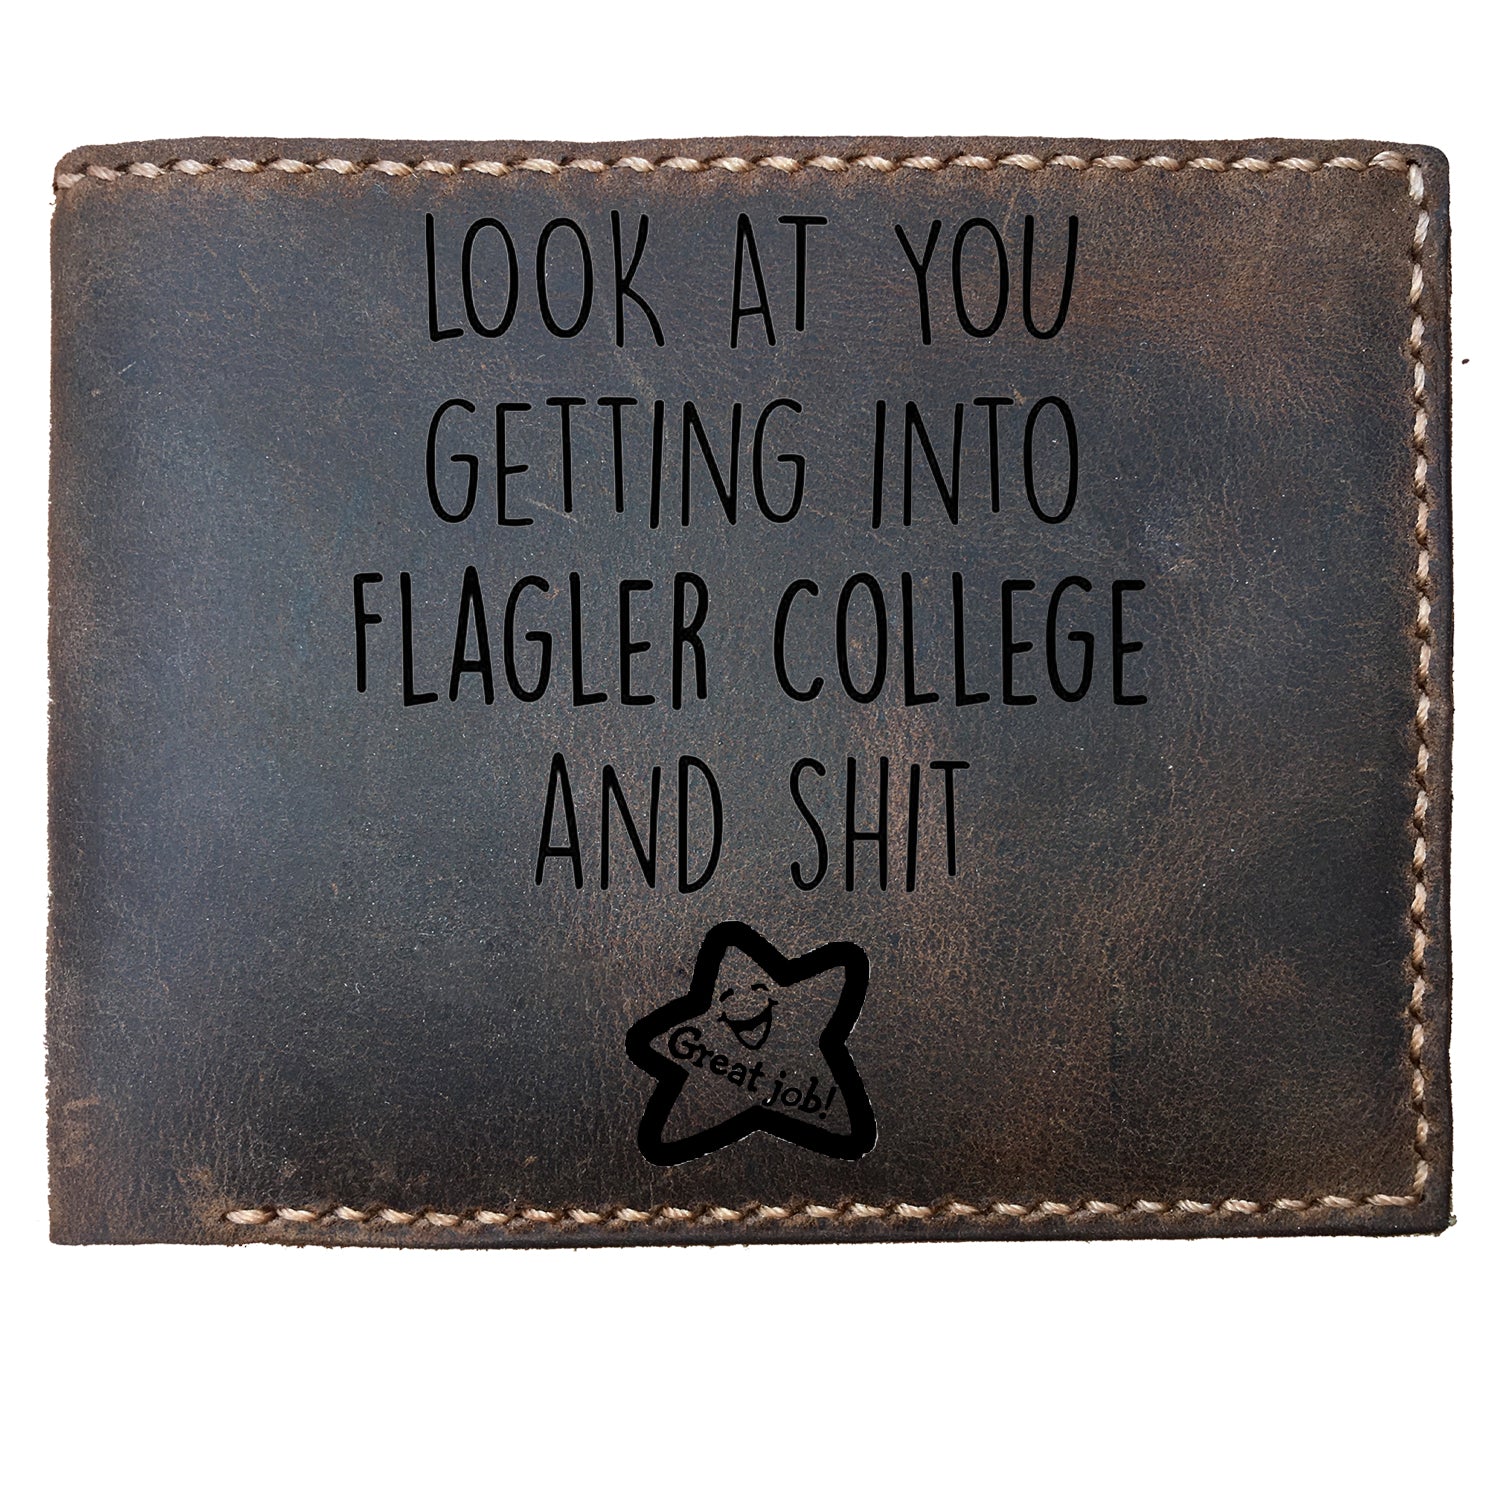 Funny Skitongifts Custom Laser Engraved Bifold Leather Wallet For Men, Look At You Getting Into Flagler College And Shit